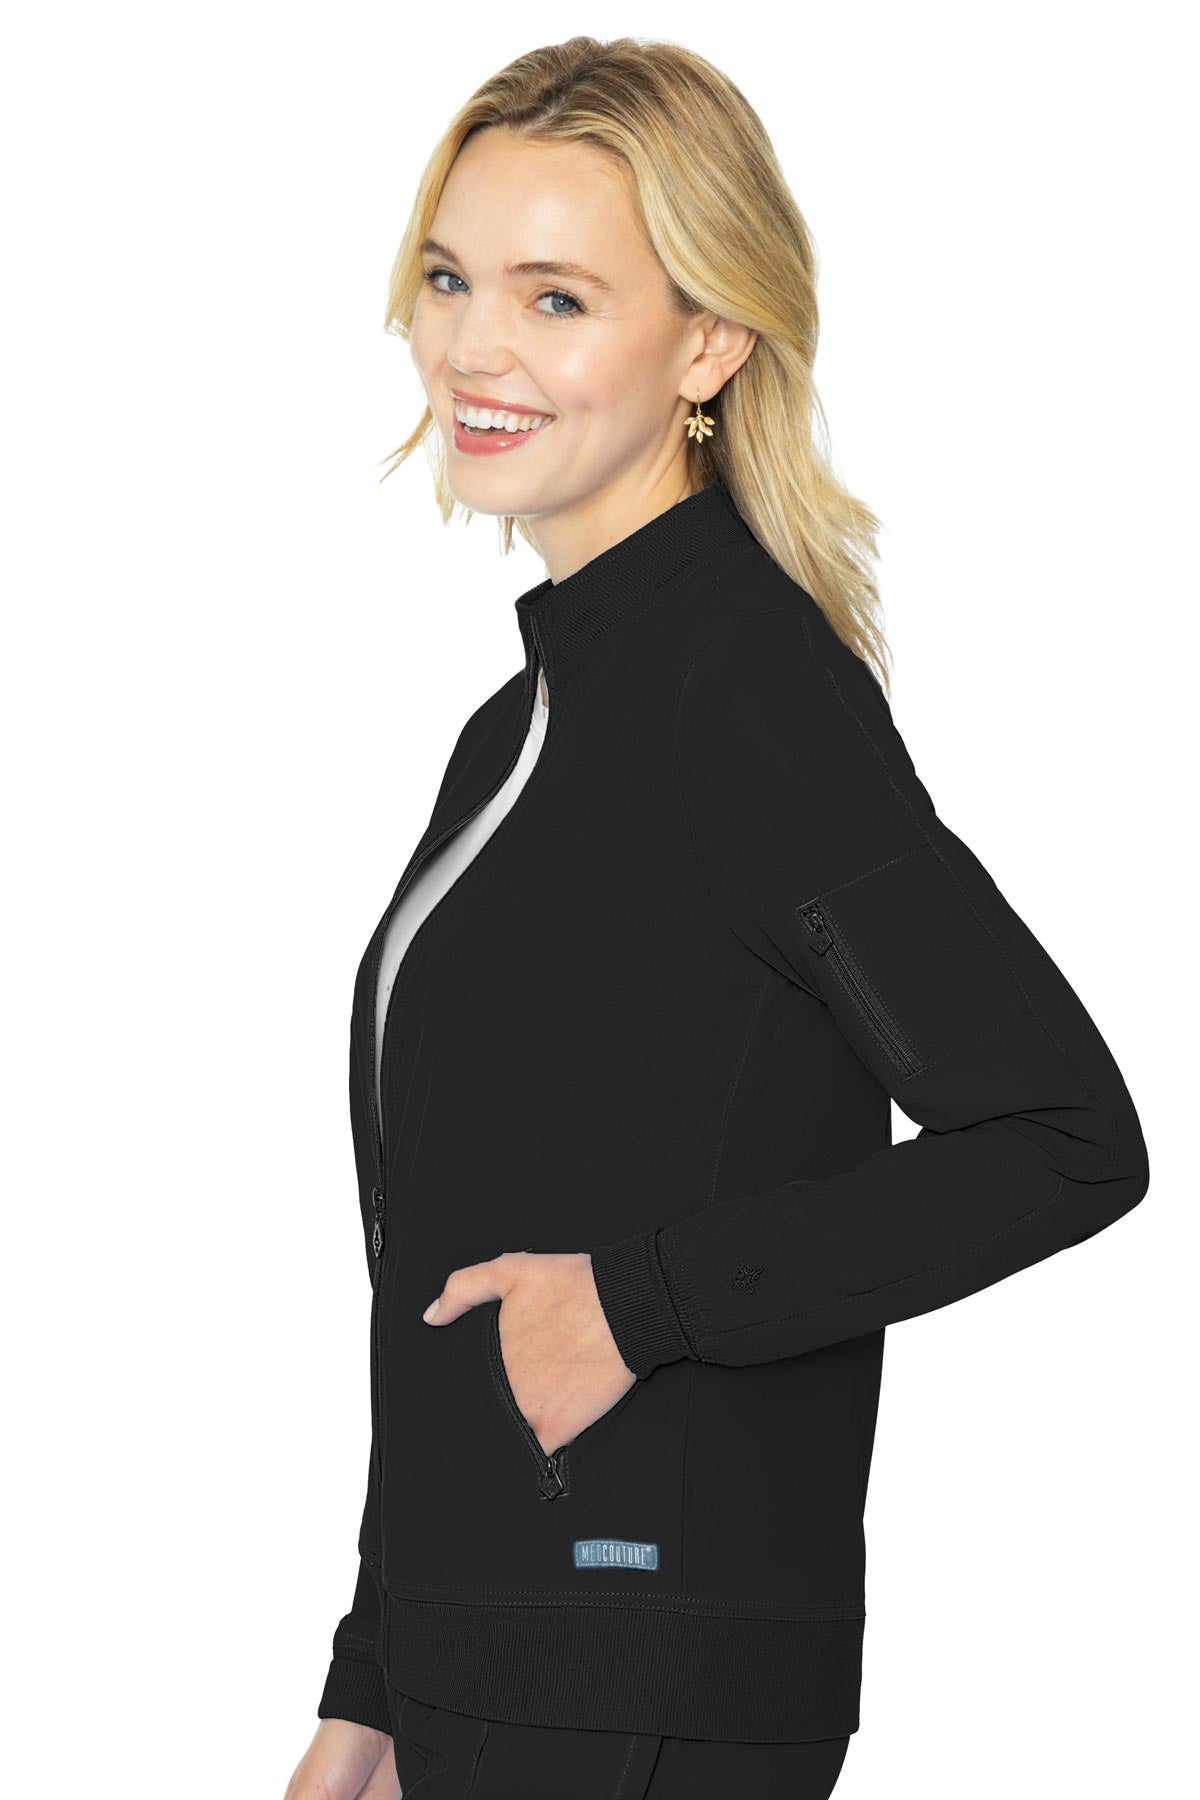 Med Couture Peaches 8674 Women's Full Zip Warm-Up Jacket Black Side